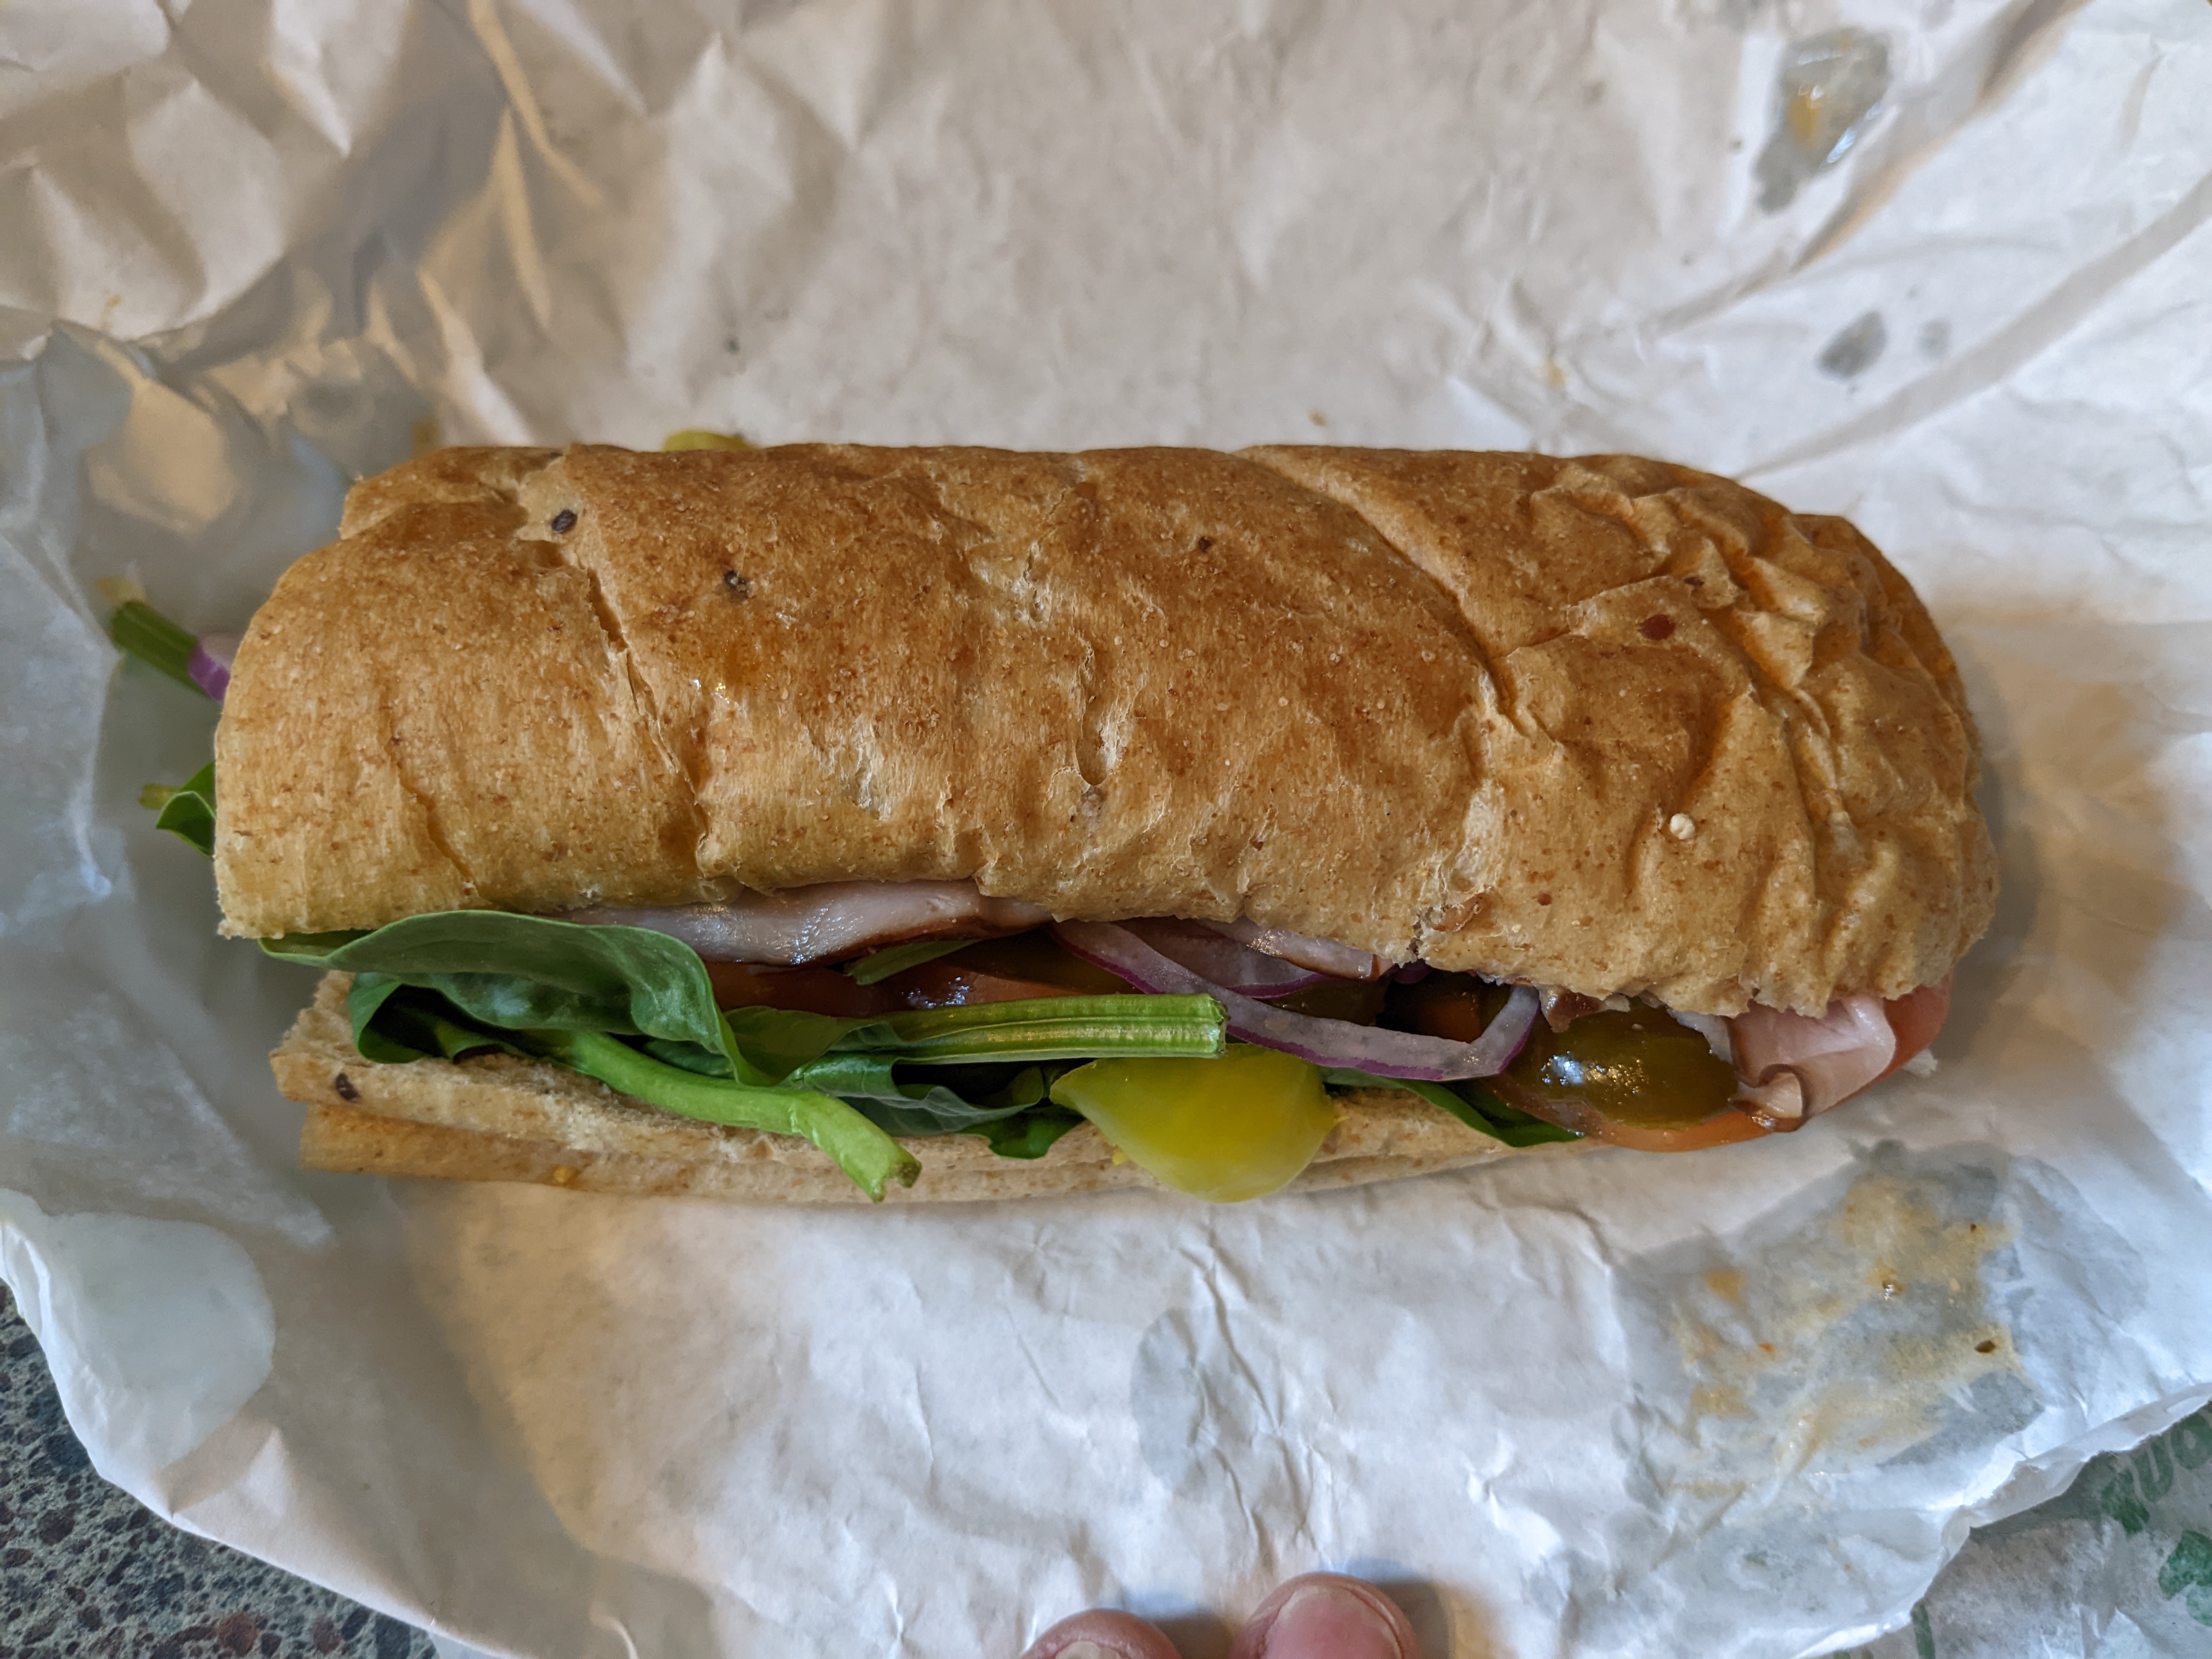 Julie's Dining Club: Subway Sandwiches and Cookies